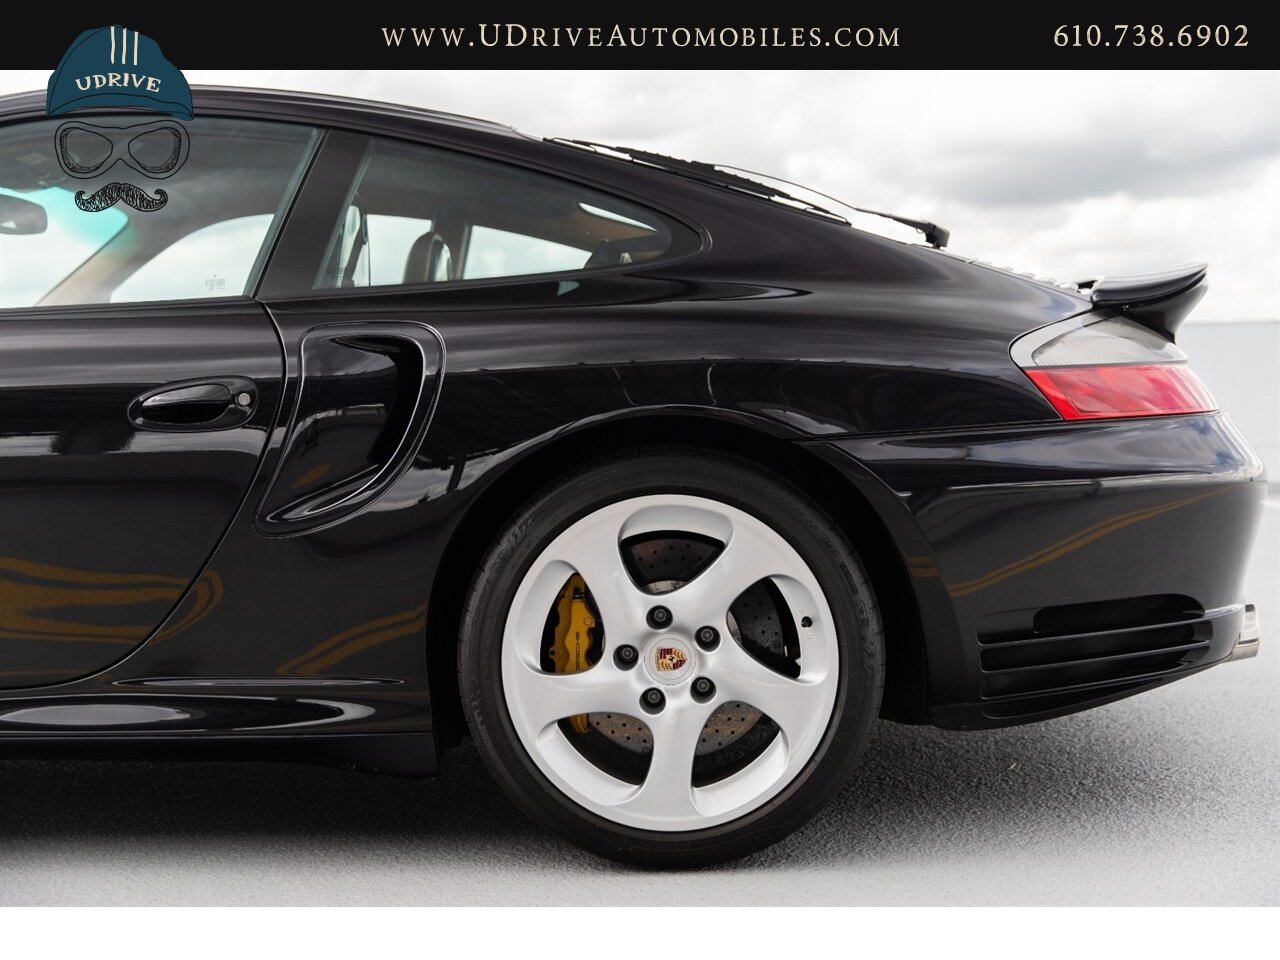 2005 Porsche 911 Turbo S 6 Speed 14k Miles Sport Sts Painted Backs  Natural Brown Lthr $144,070 MSRP - Photo 23 - West Chester, PA 19382